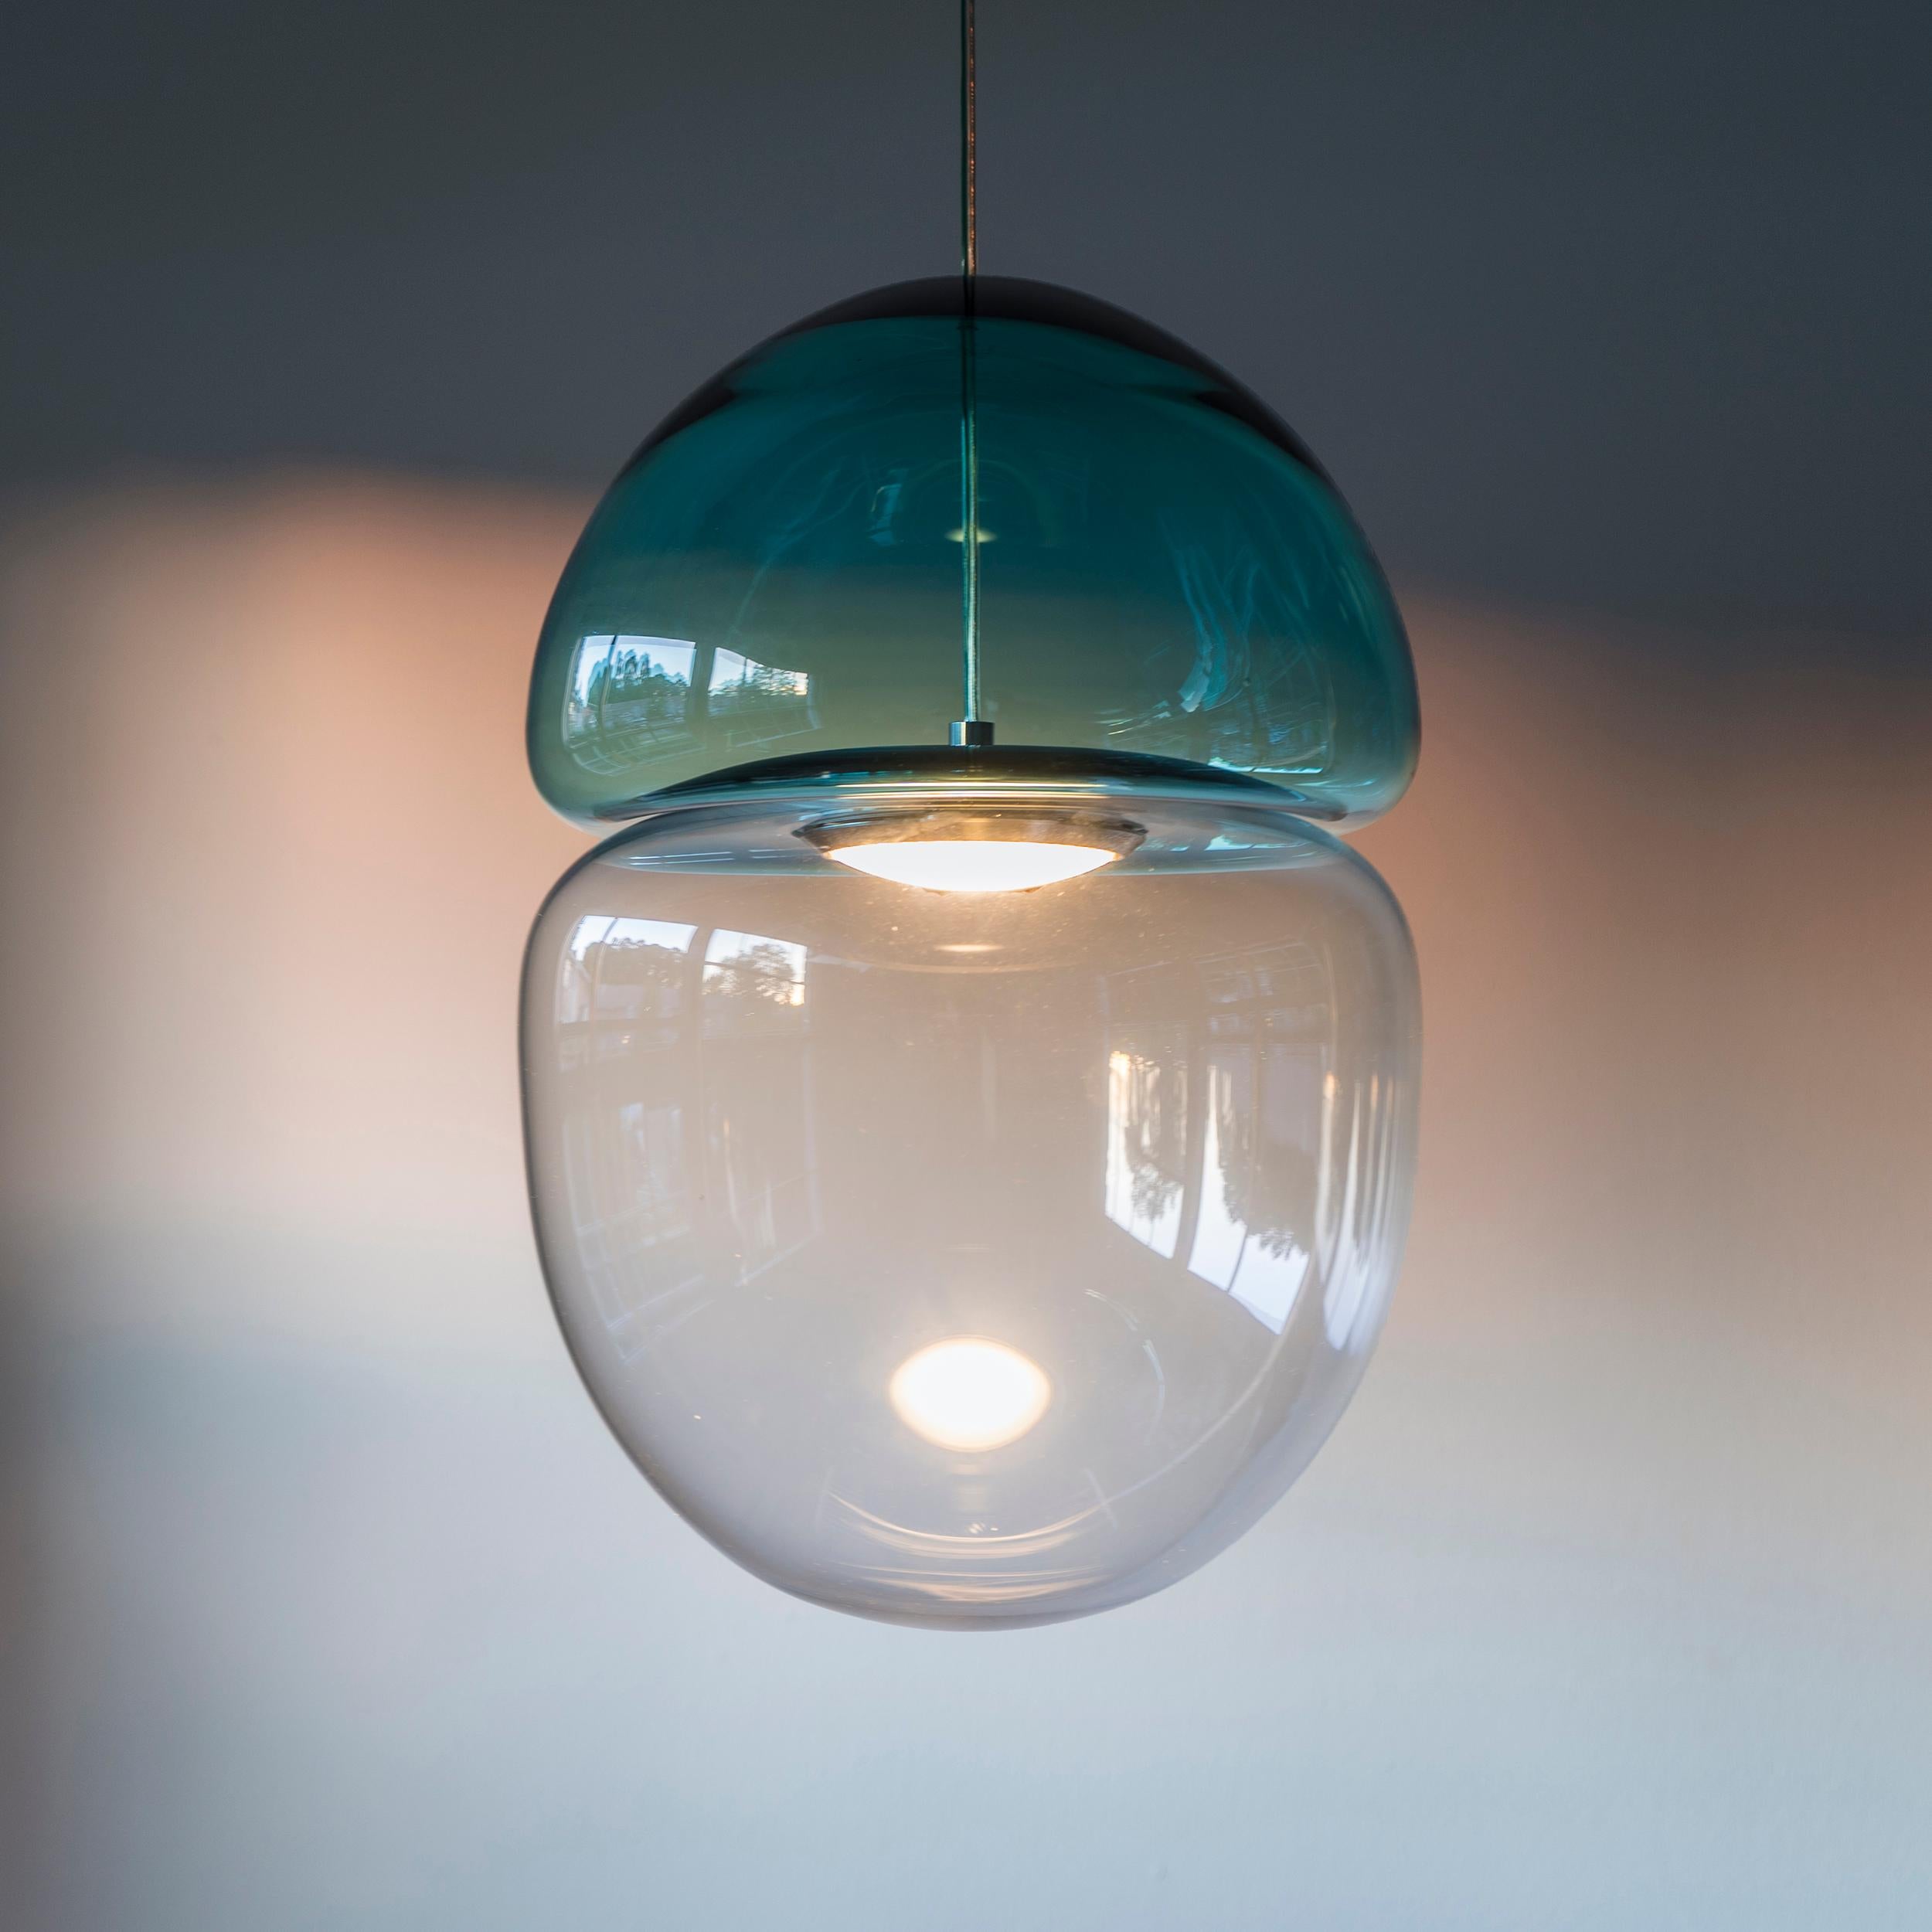 Dew and drop is a pendant lamp made of two pieces of hand blown glass, resembling a dewdrop resting on top of a falling droplet of water. The light is trapped in between the glass, creating natural shades and reflections all around.

The dew and